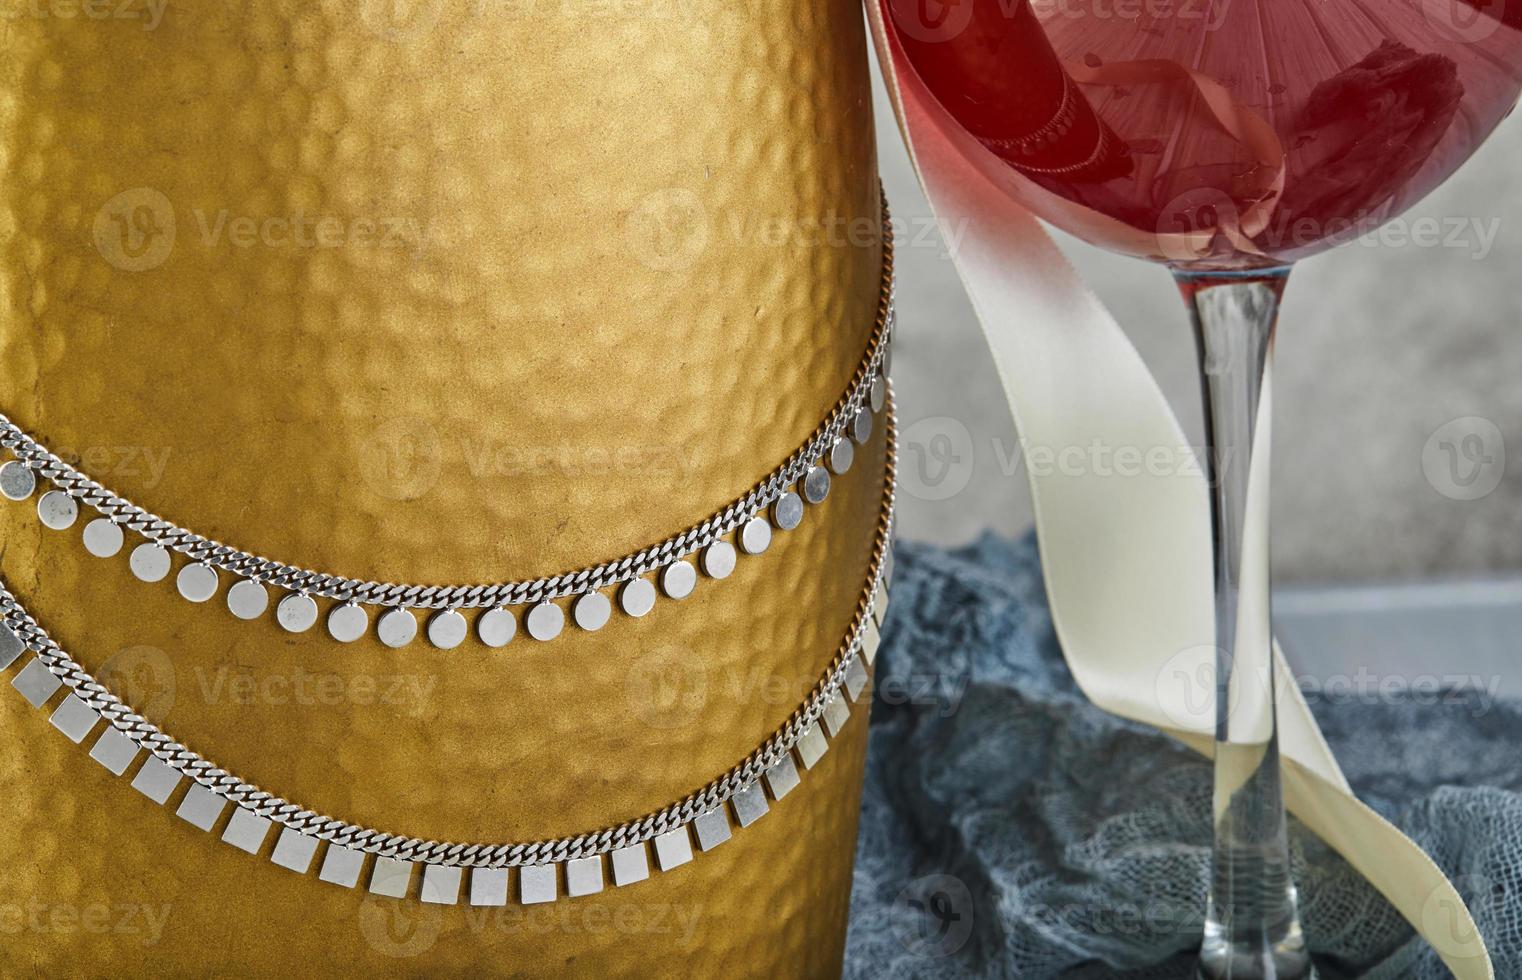 Silver chain on gold bottle and glass of wine photo